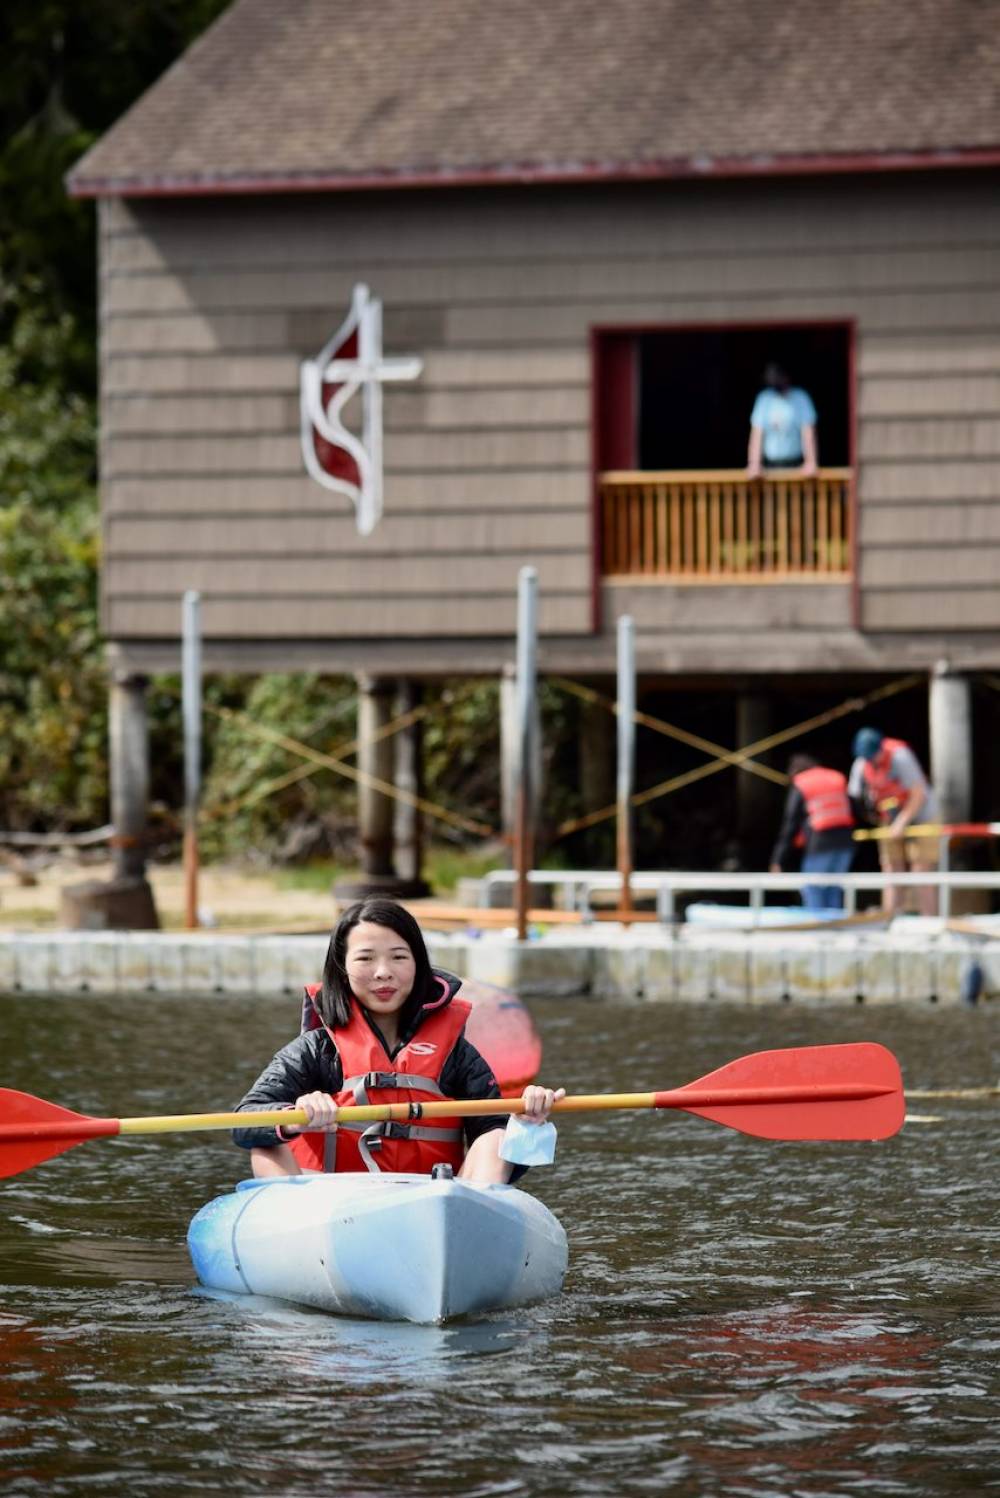 TOP OREGON CHRISTIAN CAMP: Camp Magruder is a Top Christian Summer Camp located in Rockaway Beach Oregon offering many fun and enriching Christian and other camp programs. 